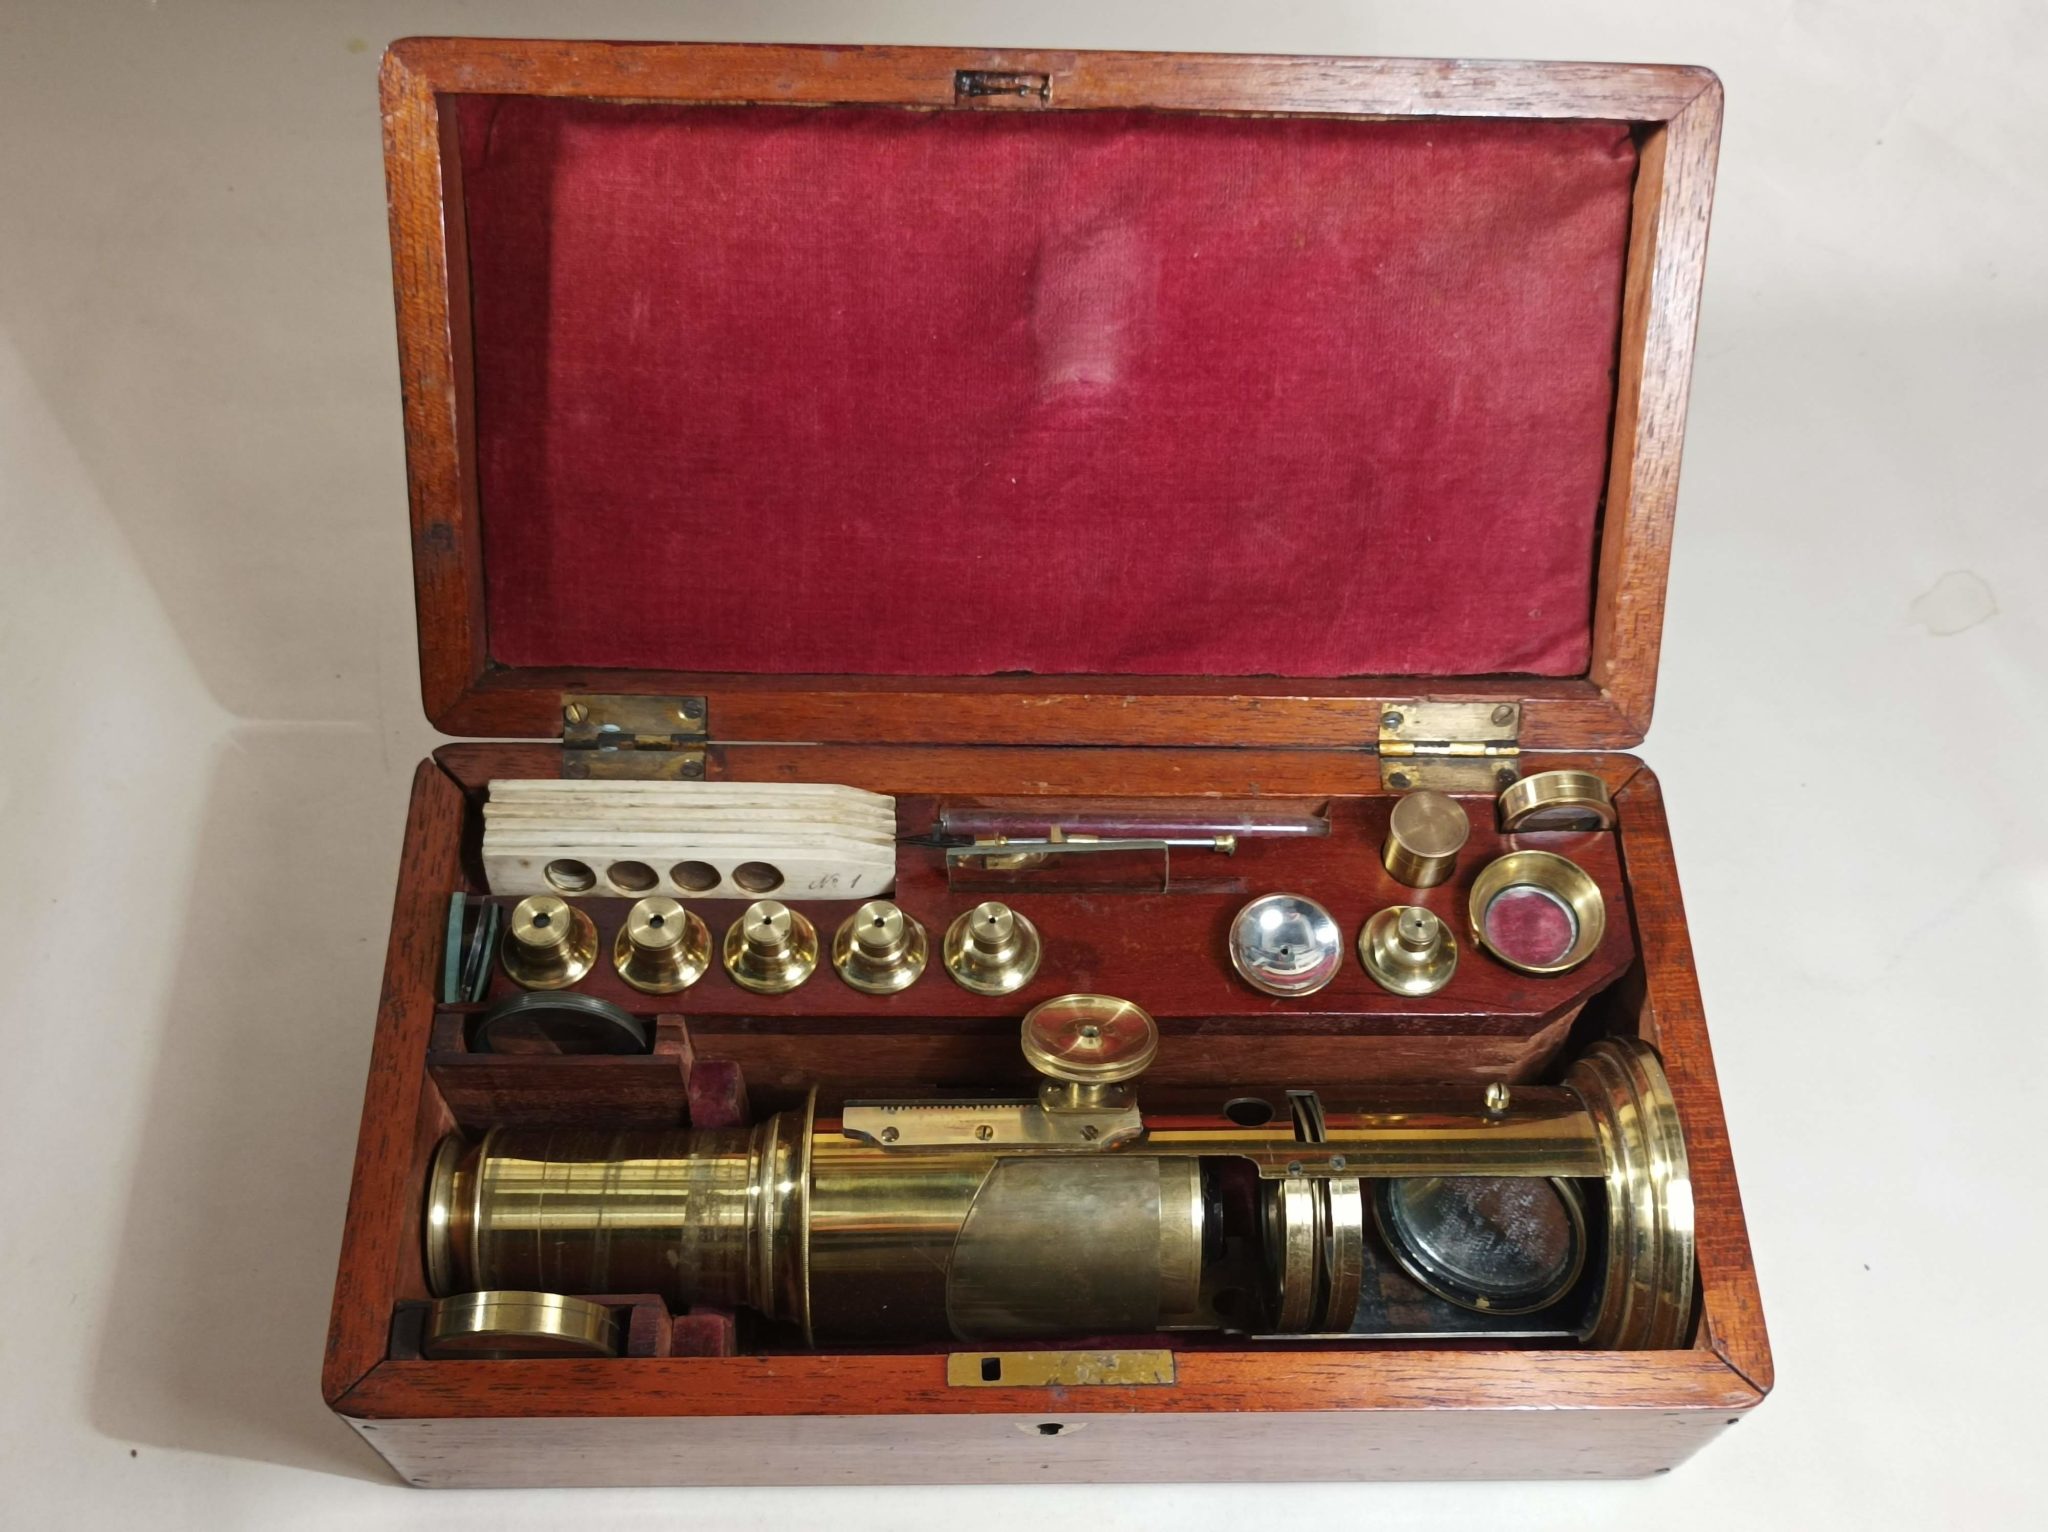 A COMPLETE DRUM-MICROSCOPE with accessories